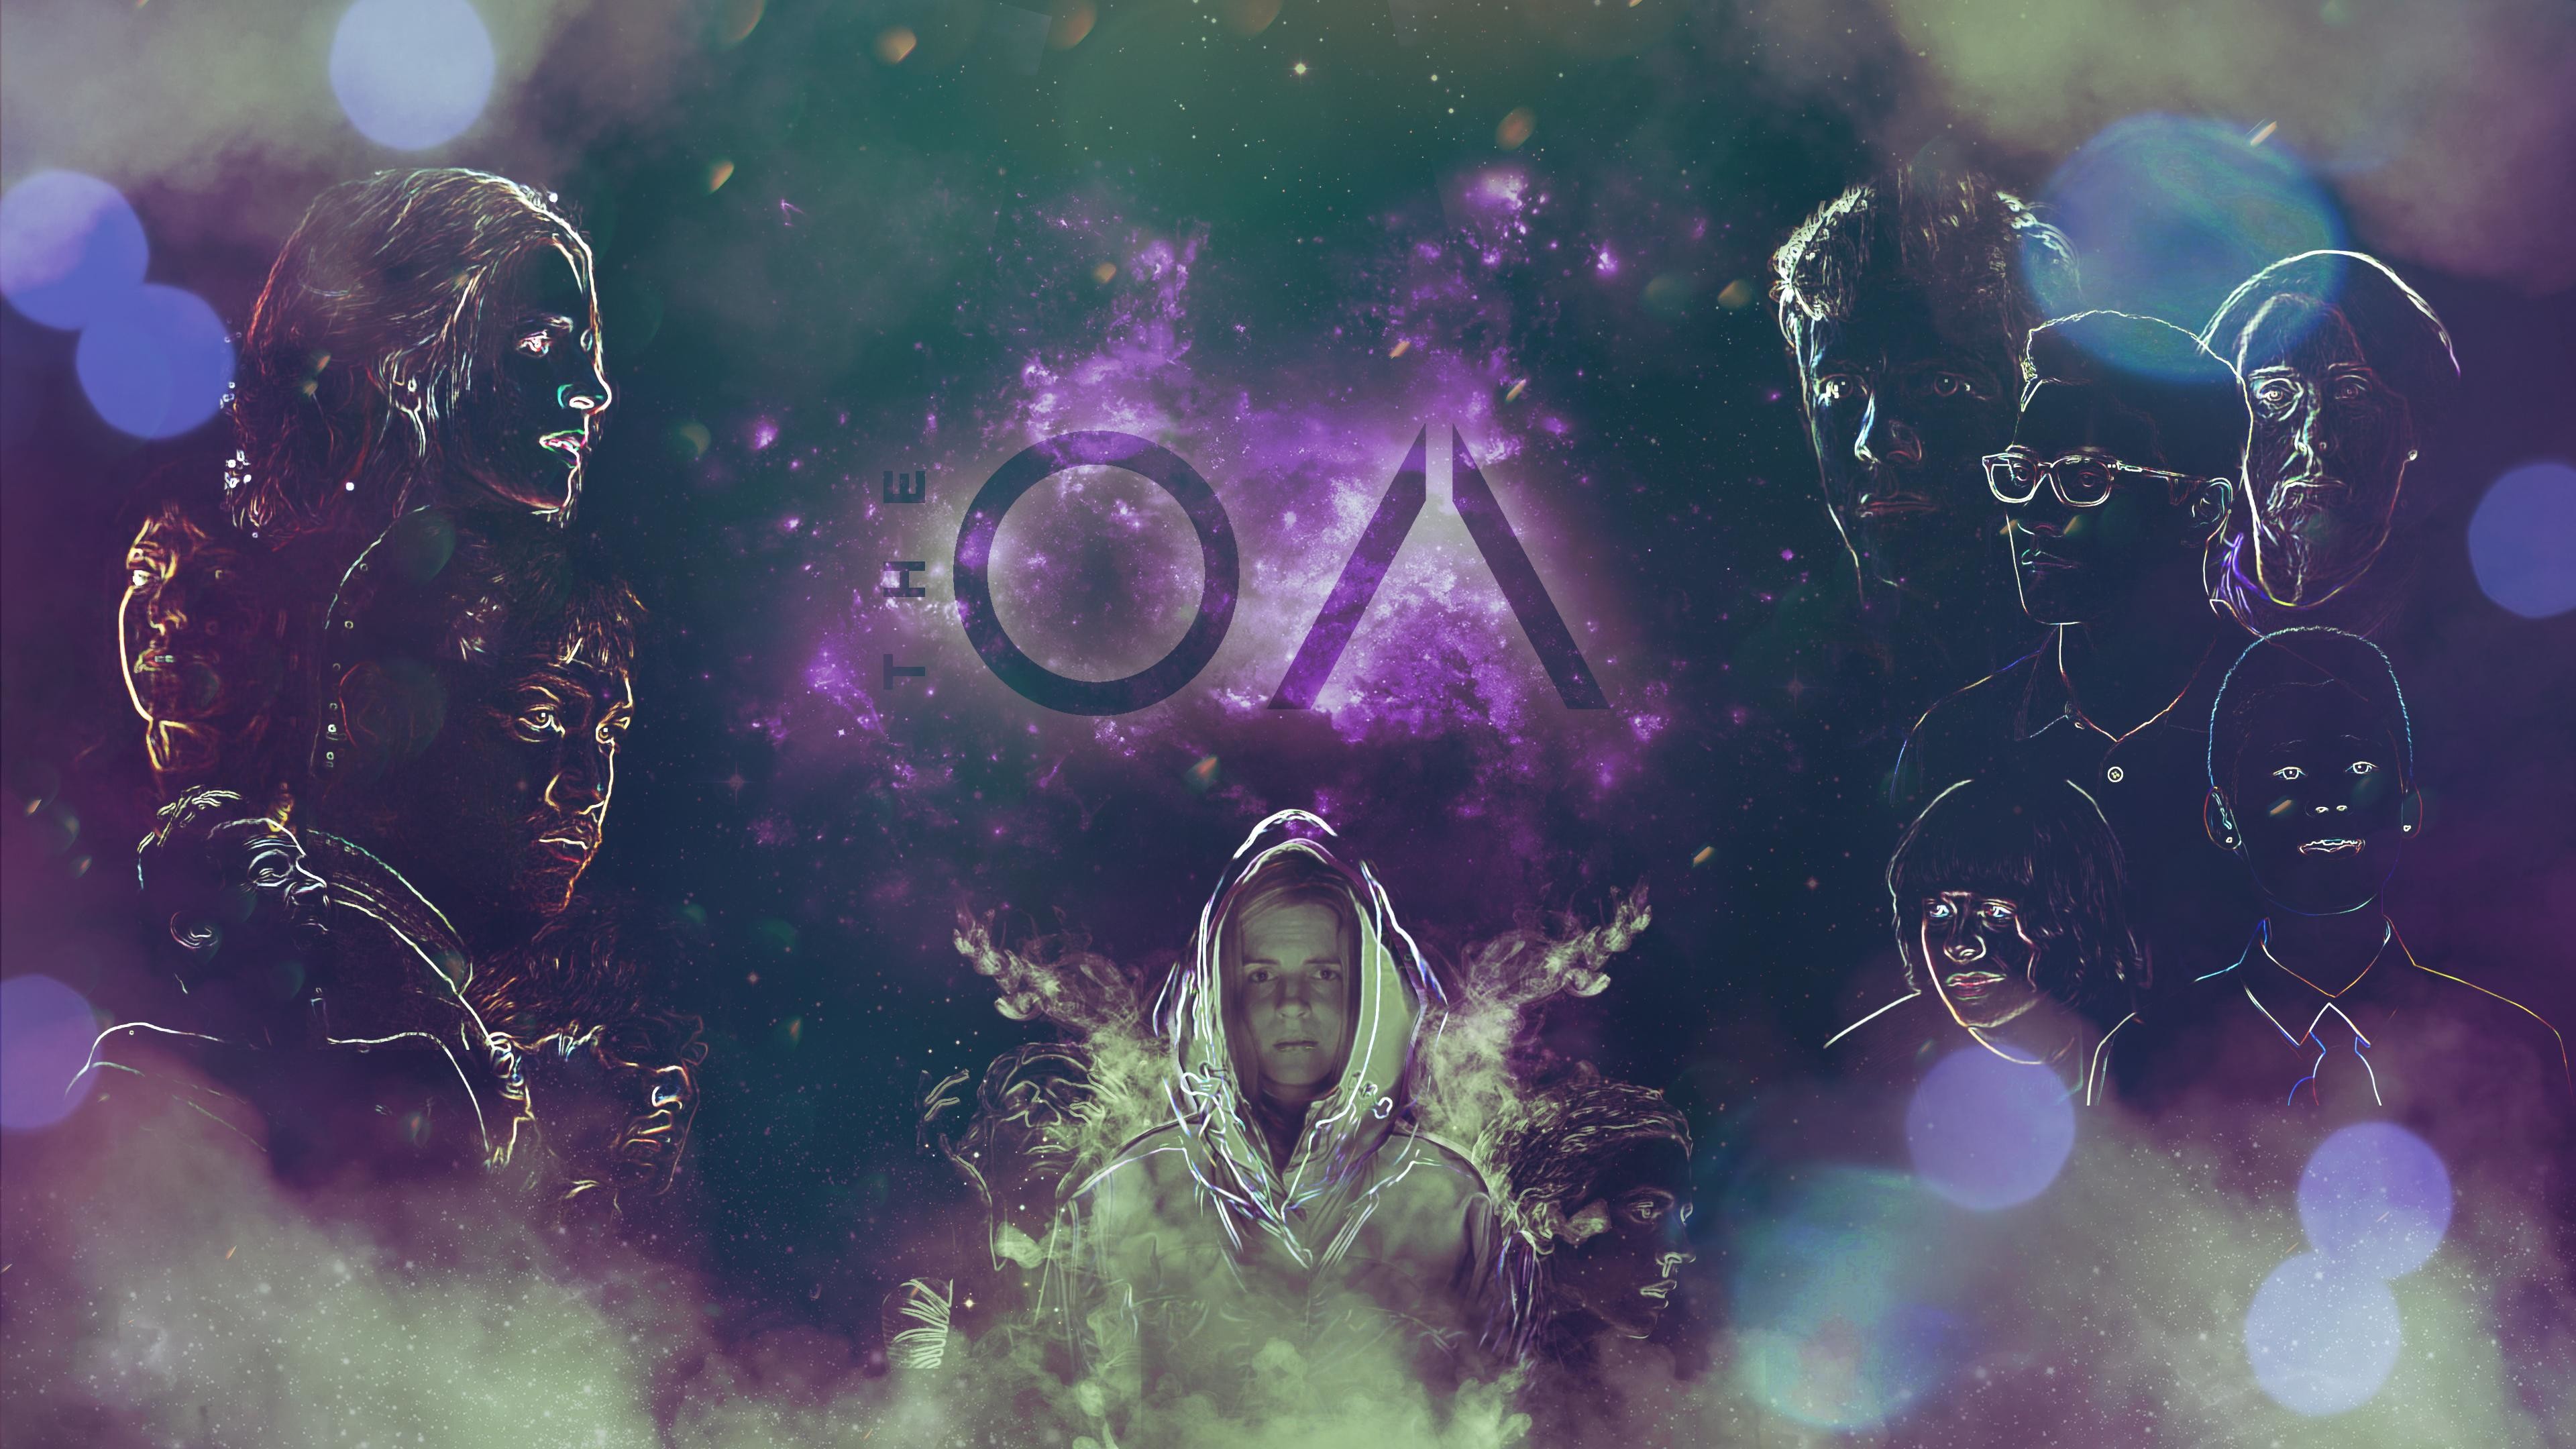 3840x2160 I made an wallpaper for The OA :) Feel free to use ...